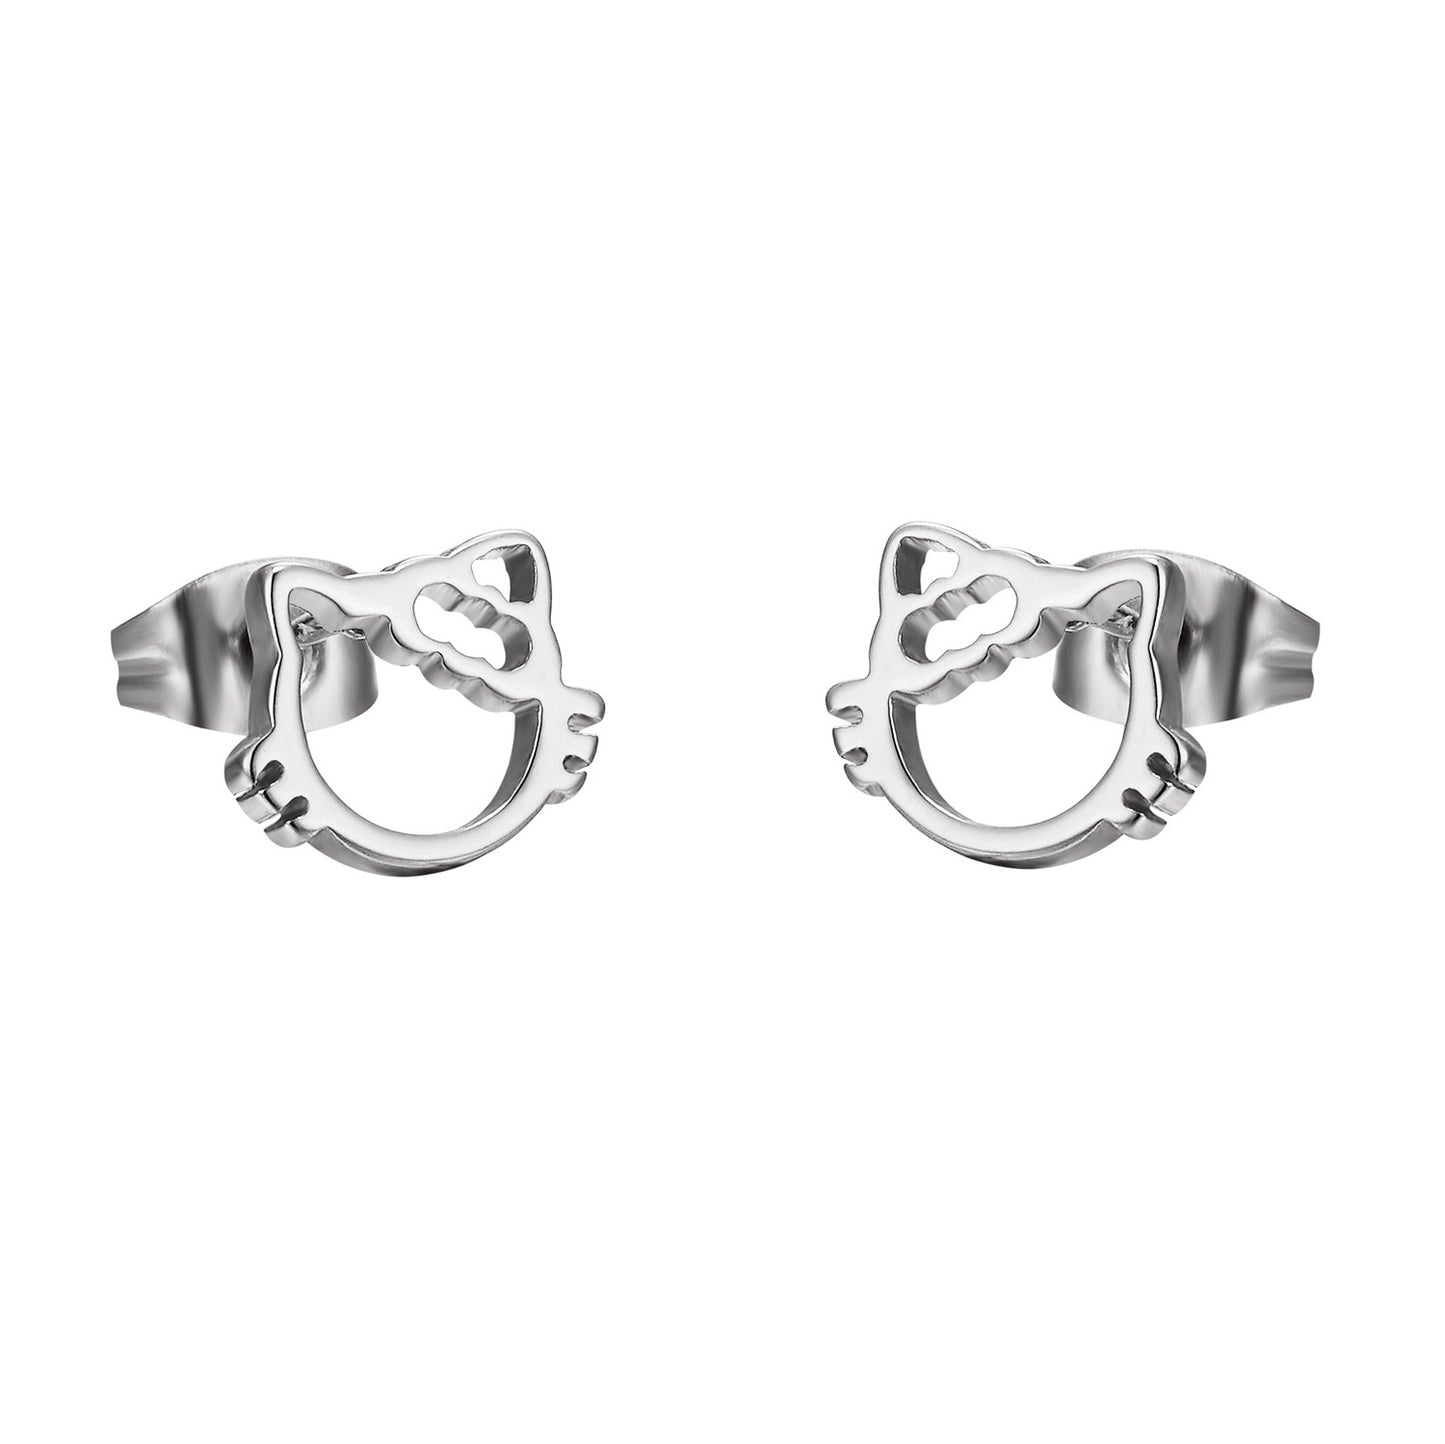 Kitty Earrings Womens Girls Silver Tone Stainless Steel Cat Studs Unique 8mm